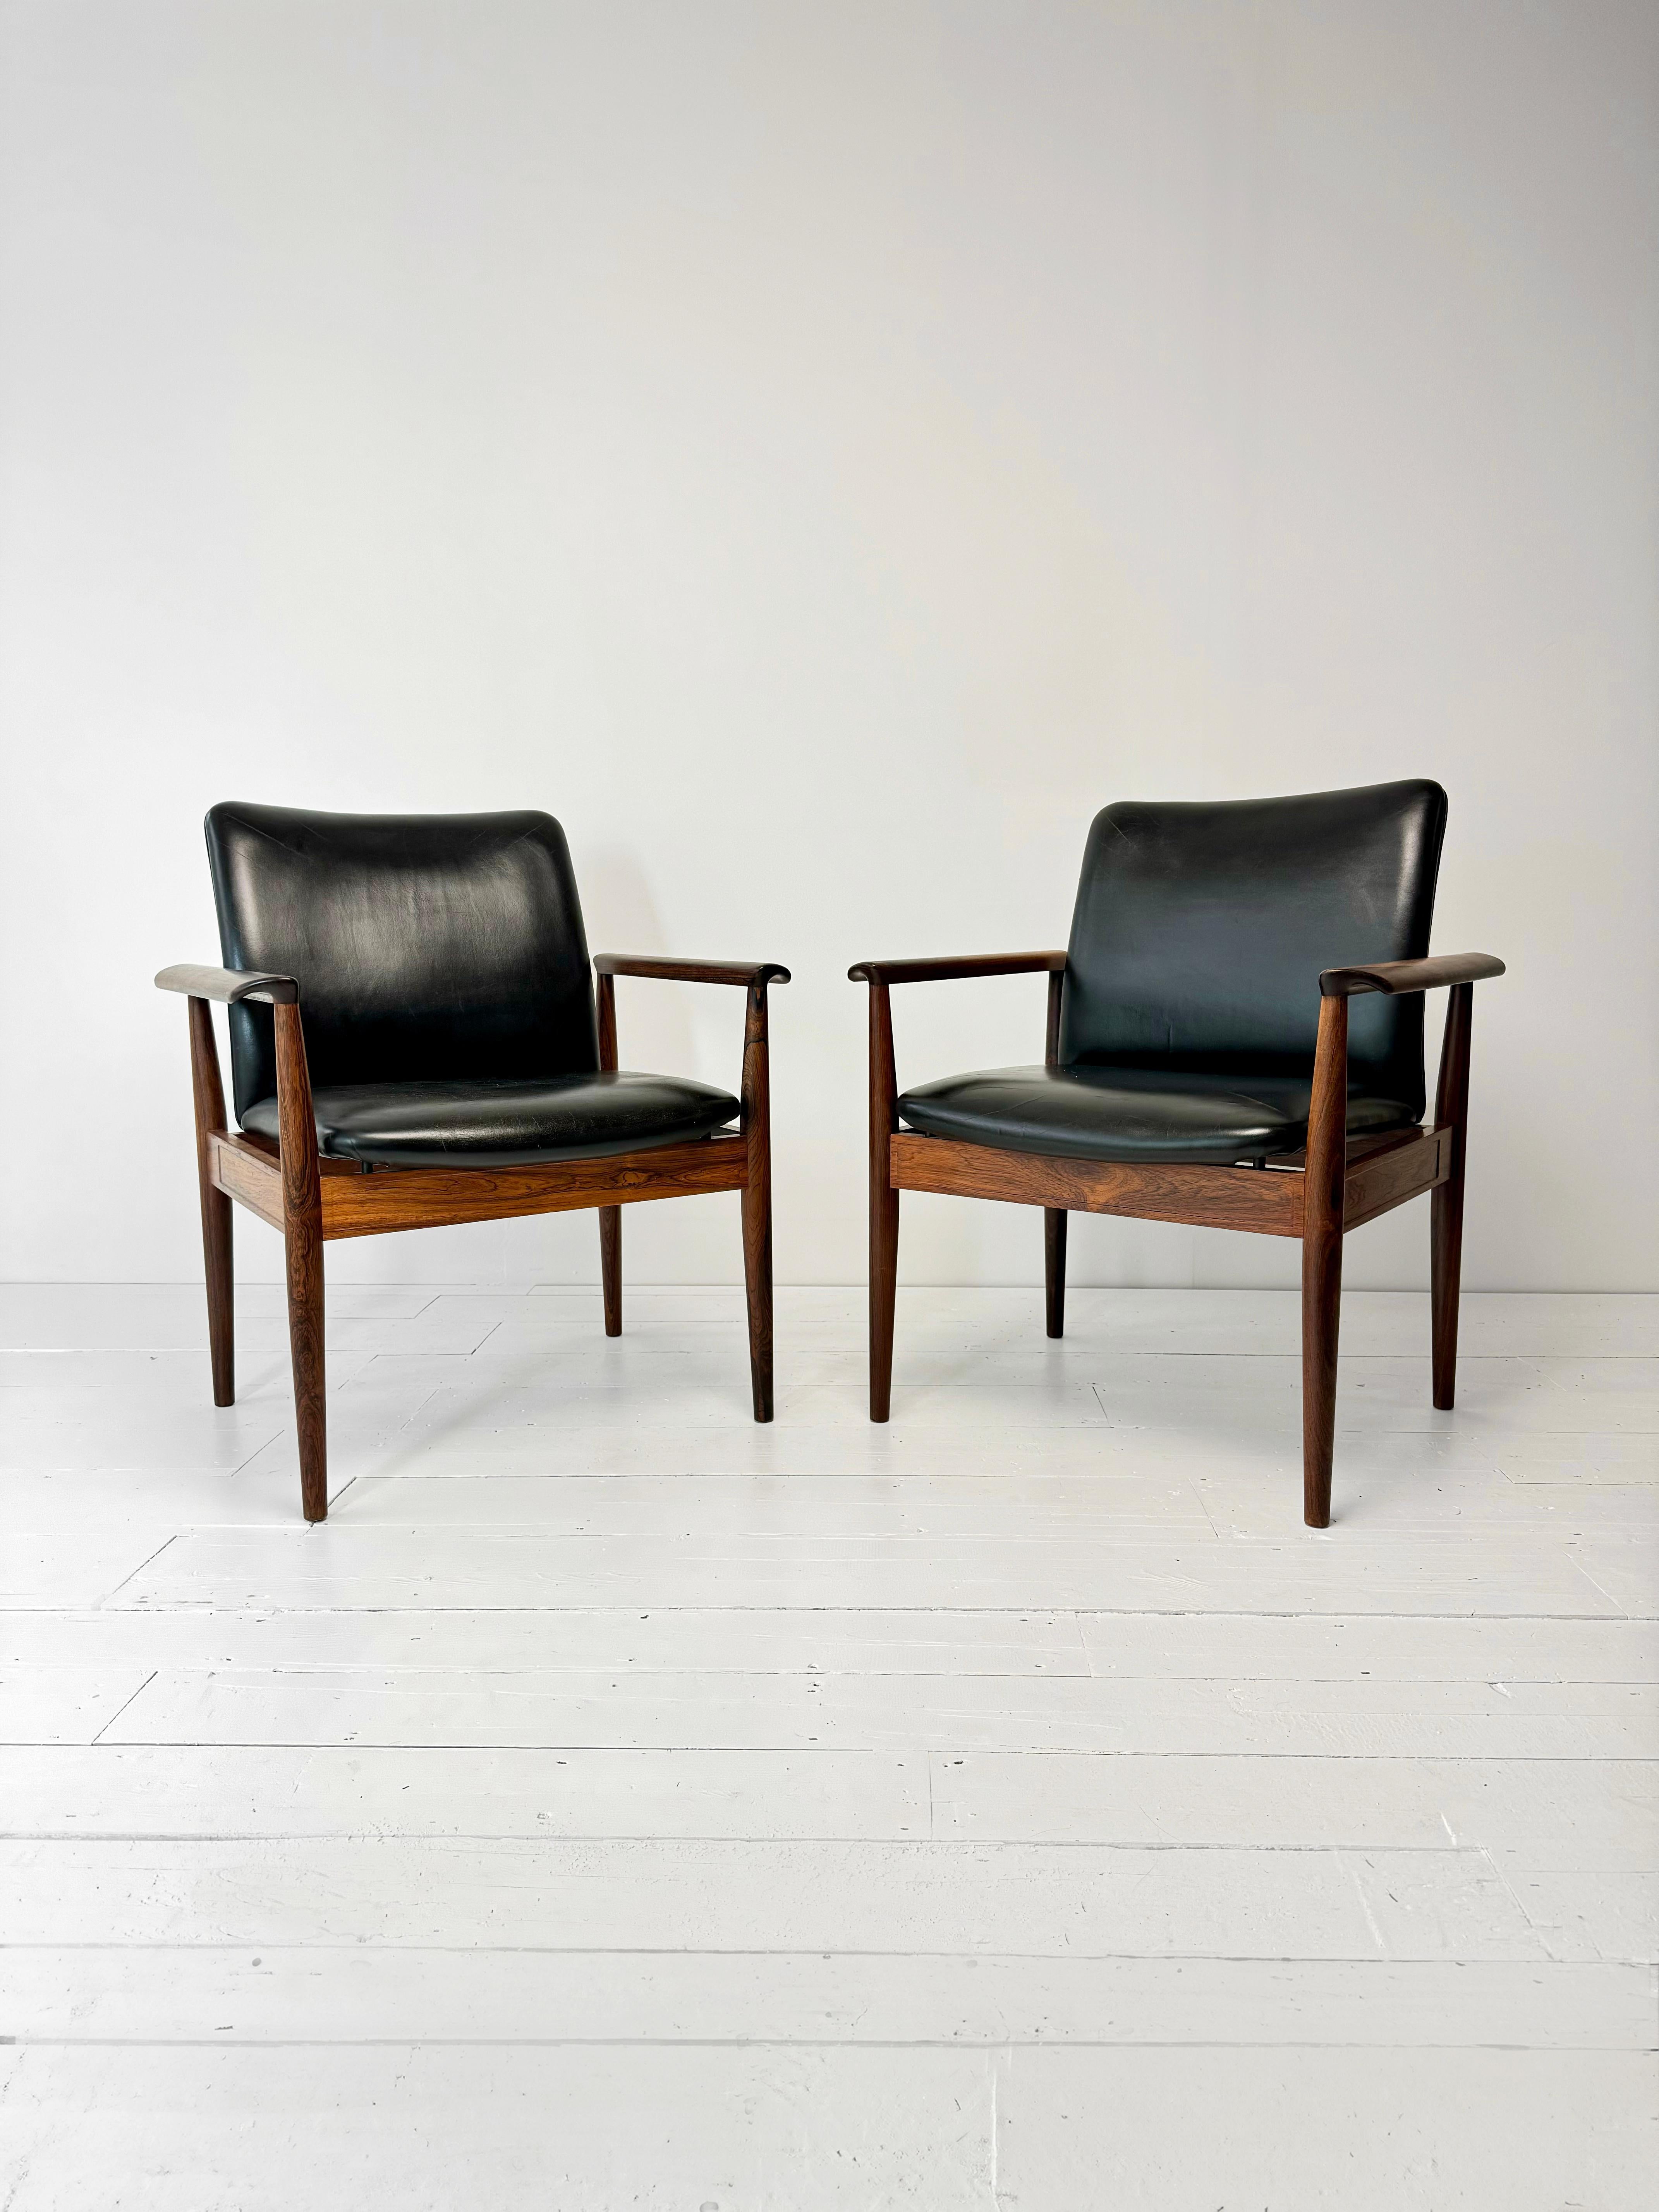 The Diplomat Armchair in Rosewood and Black Leather, designed by the iconic Danish designer Finn Juhl for France and Sons renowned Danish furniture makers of the 1960's, is a rare and important Mid Century Modern piece were originally made to